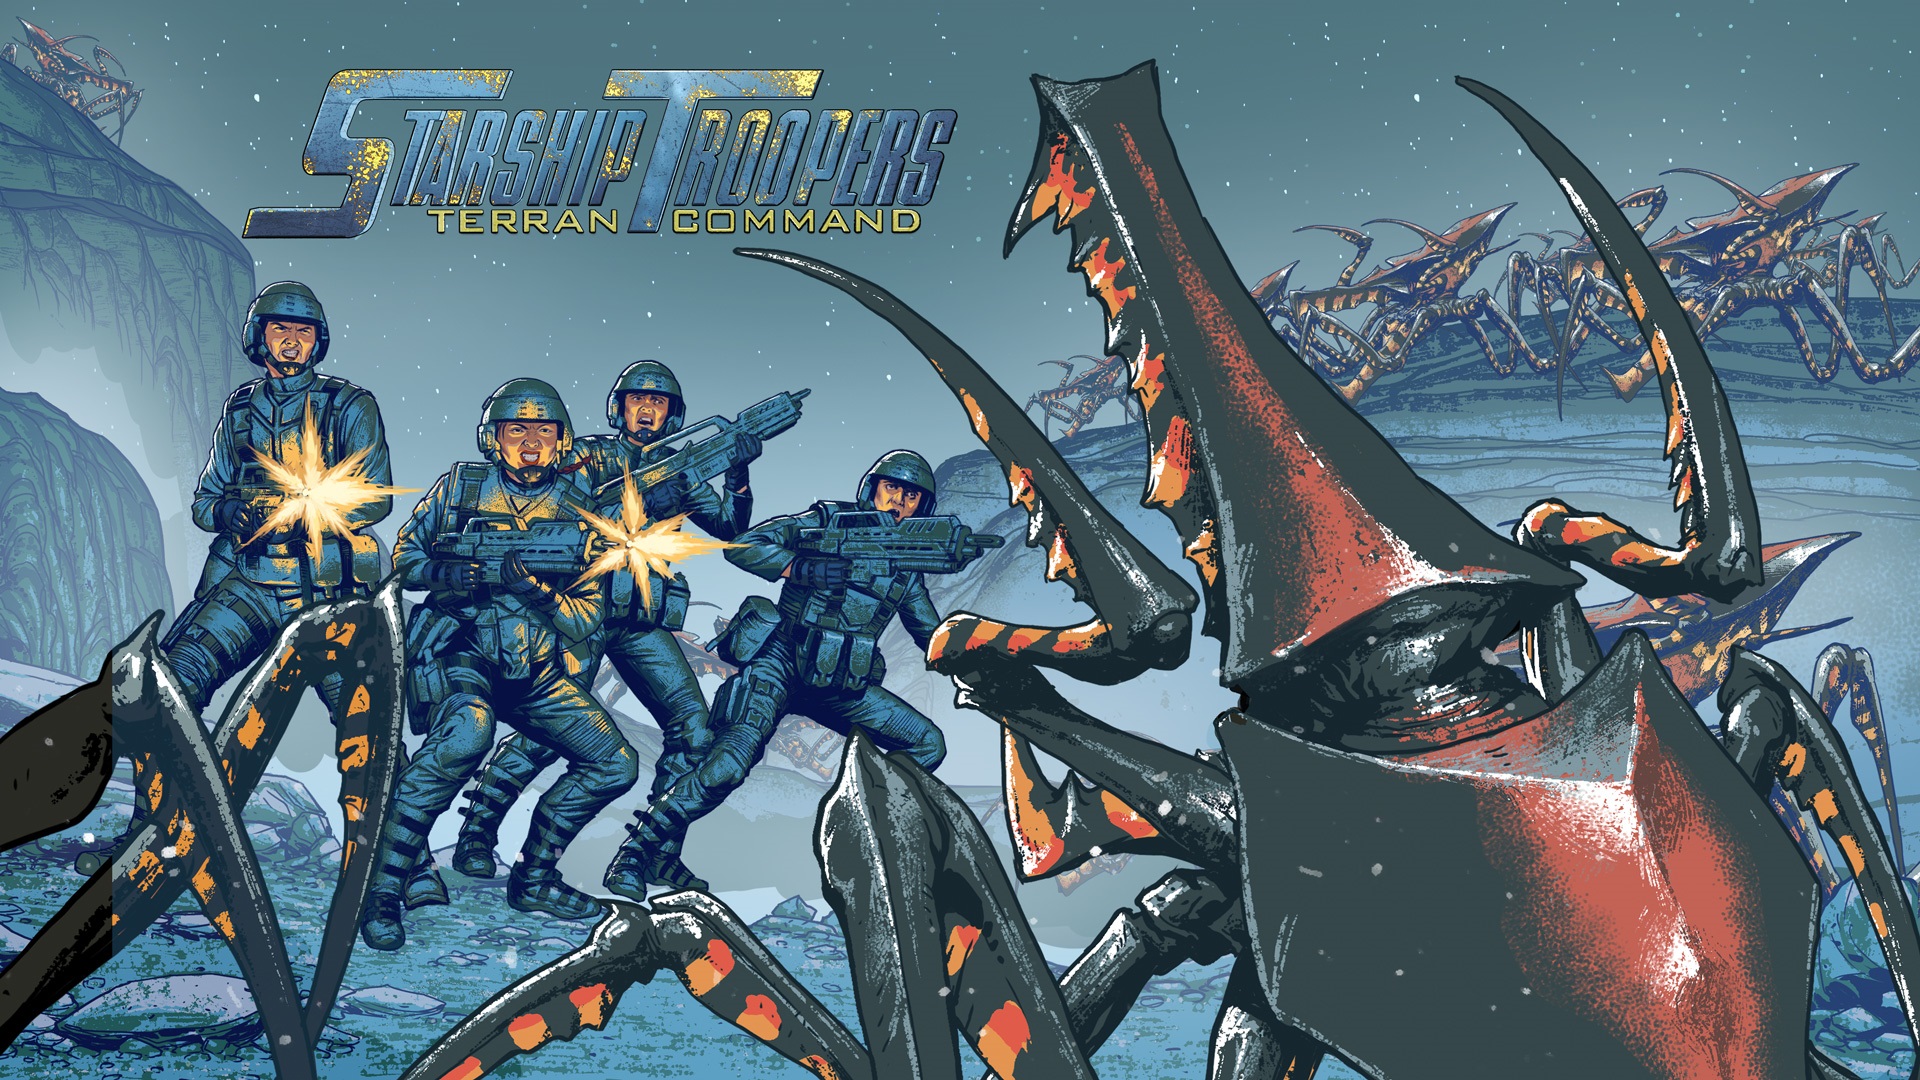 Starship Troopers - Terran Command is delayed